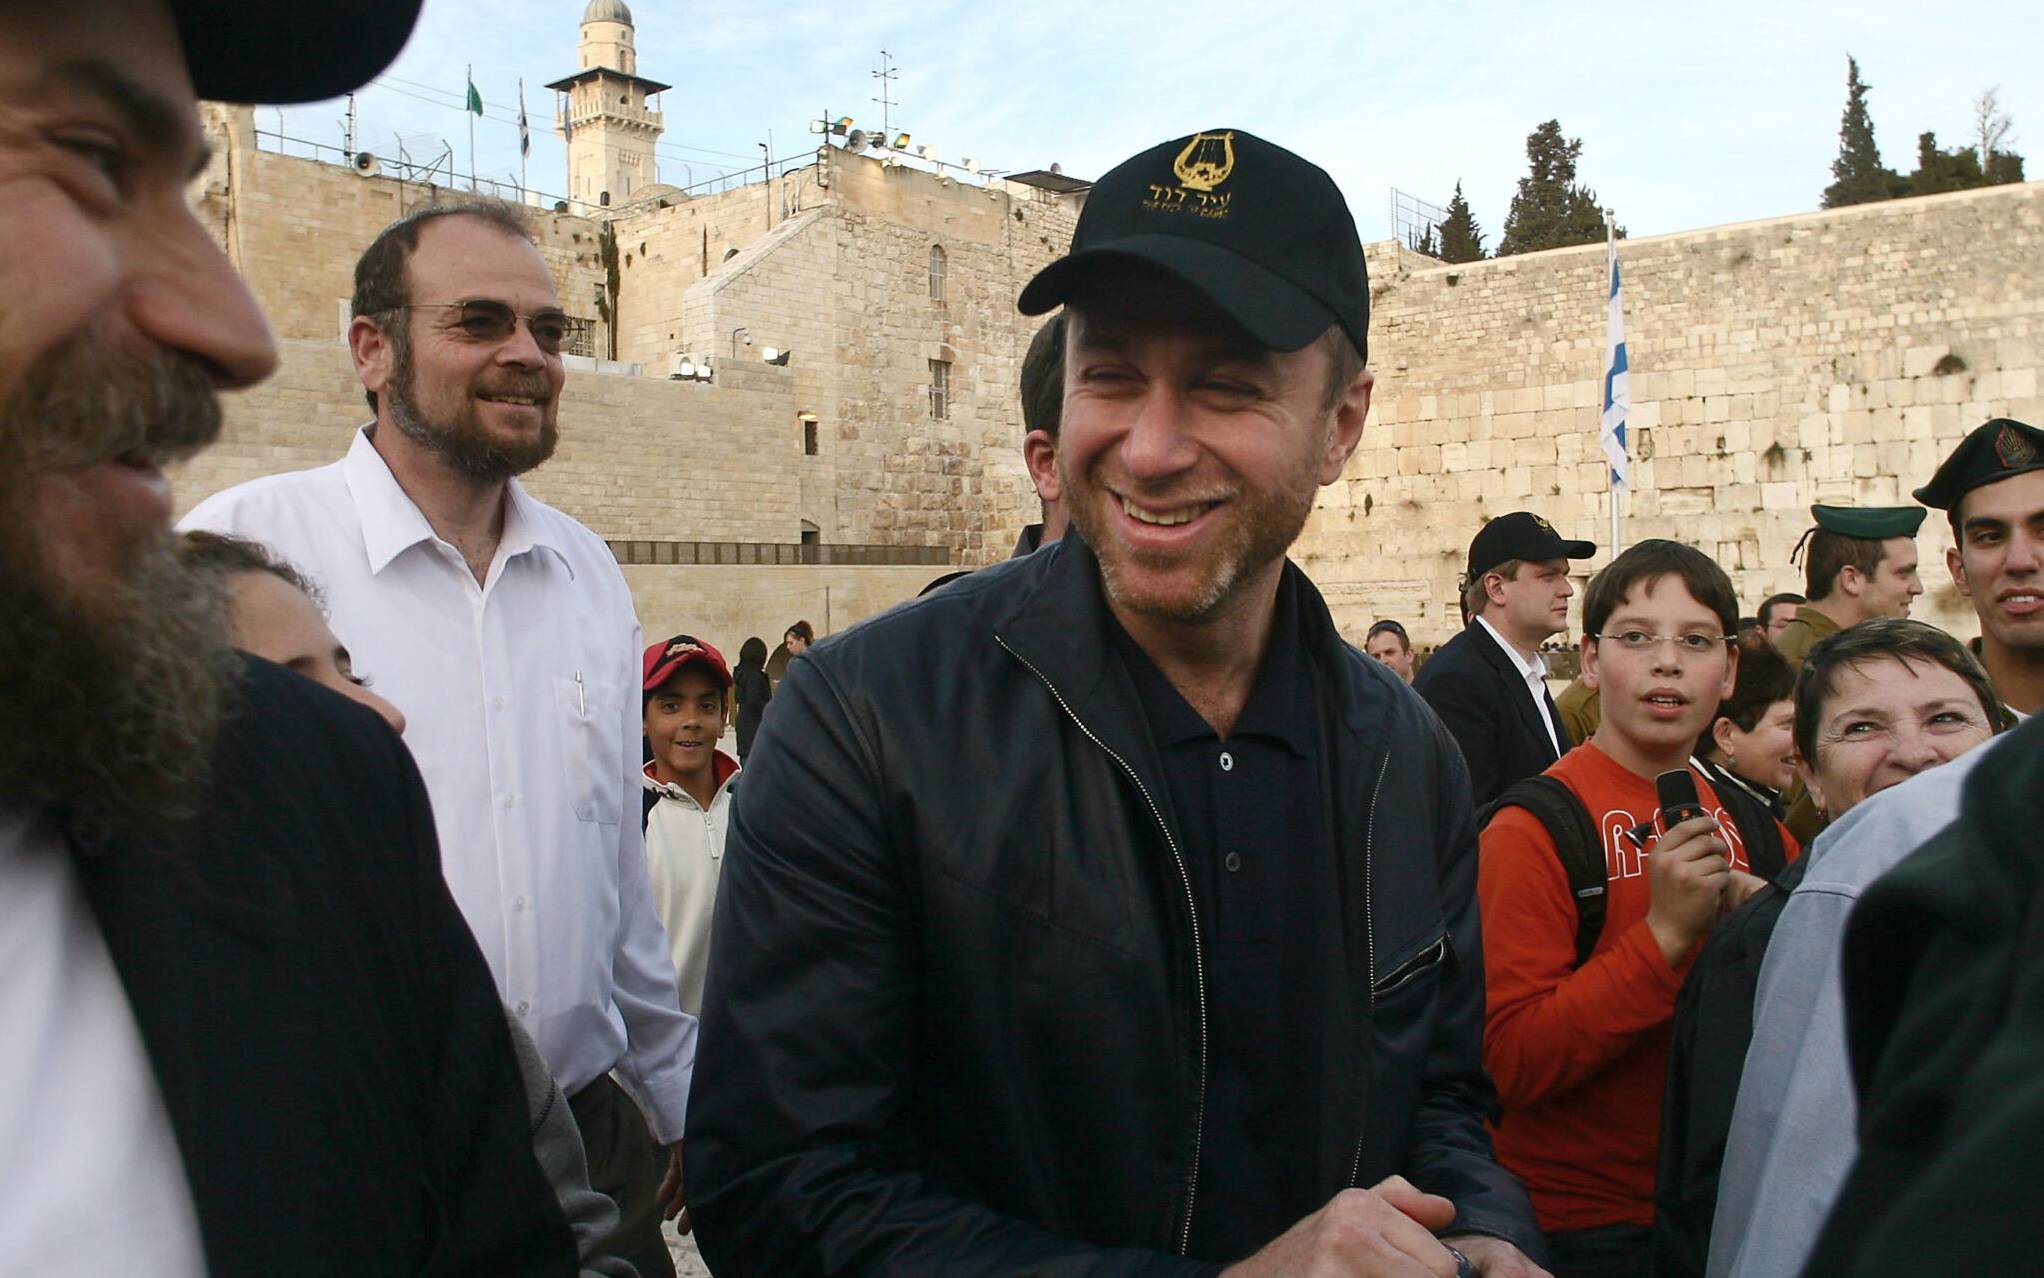 (FILES) In this file photo taken on February 7, 2006 England's Chelsea Football Club's owner Russian multibillionaire Roman Abramovich visits the Western Wall, Judaism holiest place, in Jerusalem. - Israel's Yad Vashem Holocaust memorial announced on March 10, 2022 it has suspended ties with Roman Abramovich, the Russian billionaire owner of Chelsea FC and major donor facing sanctions worldwide following the invasion of Ukraine. (Photo by OREL COHEN / AFP)